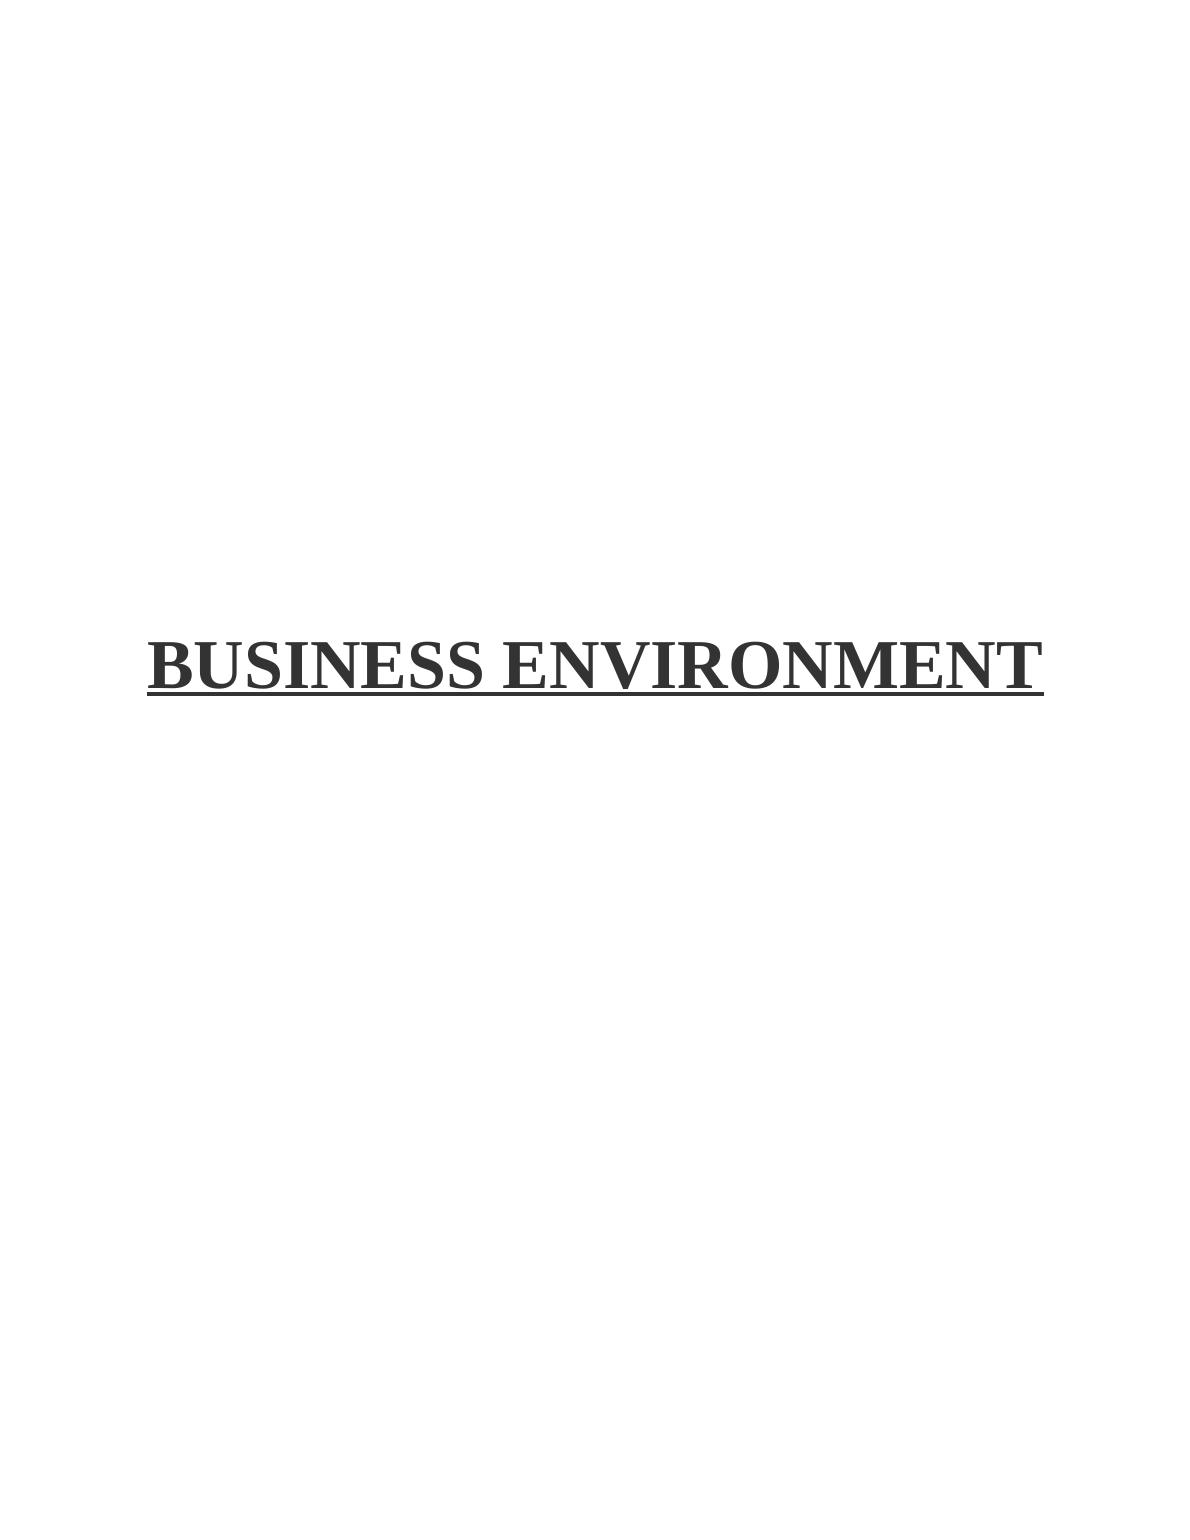 Business Environment Analysis of BBC_1